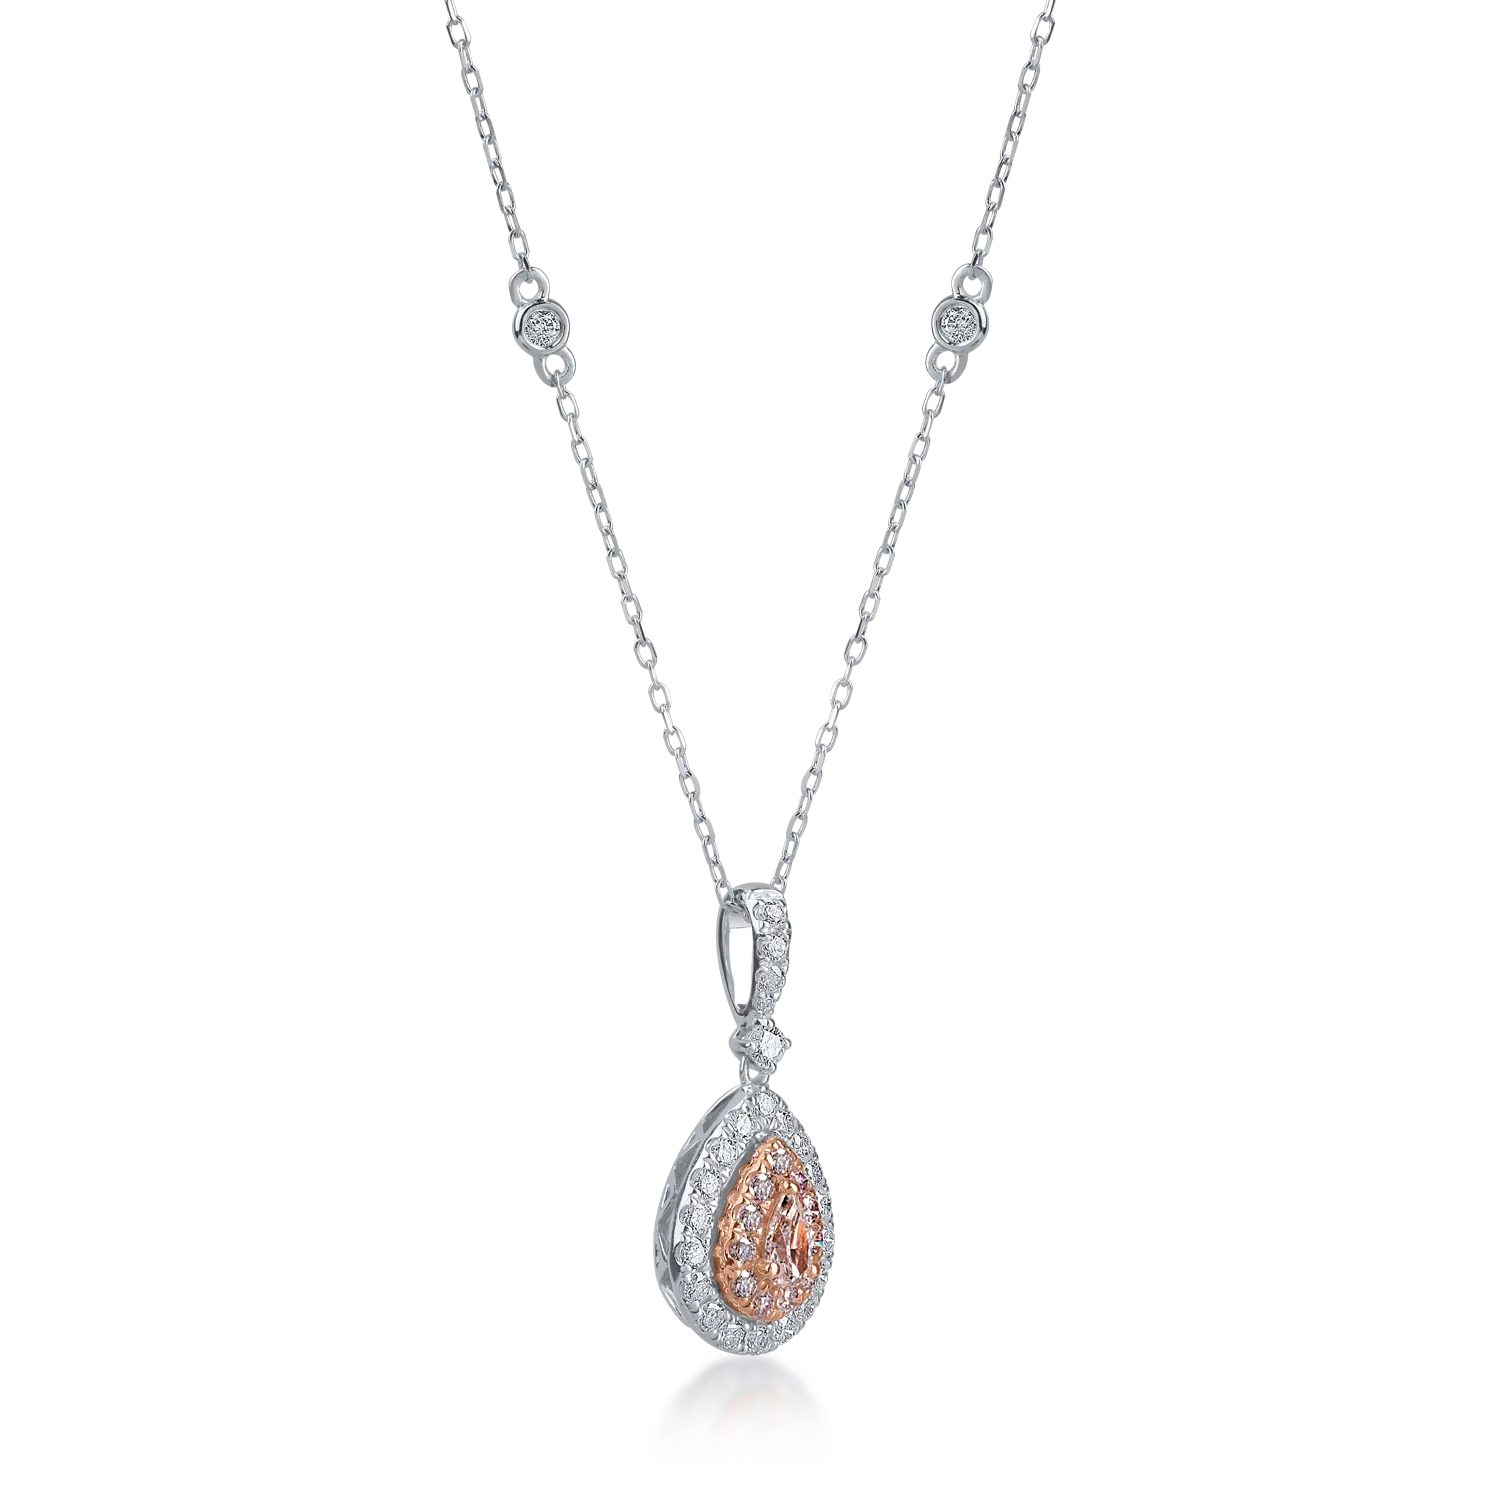 White-rose gold pendant necklace with 0.31ct clear diamonds and 0.25ct pink diamonds